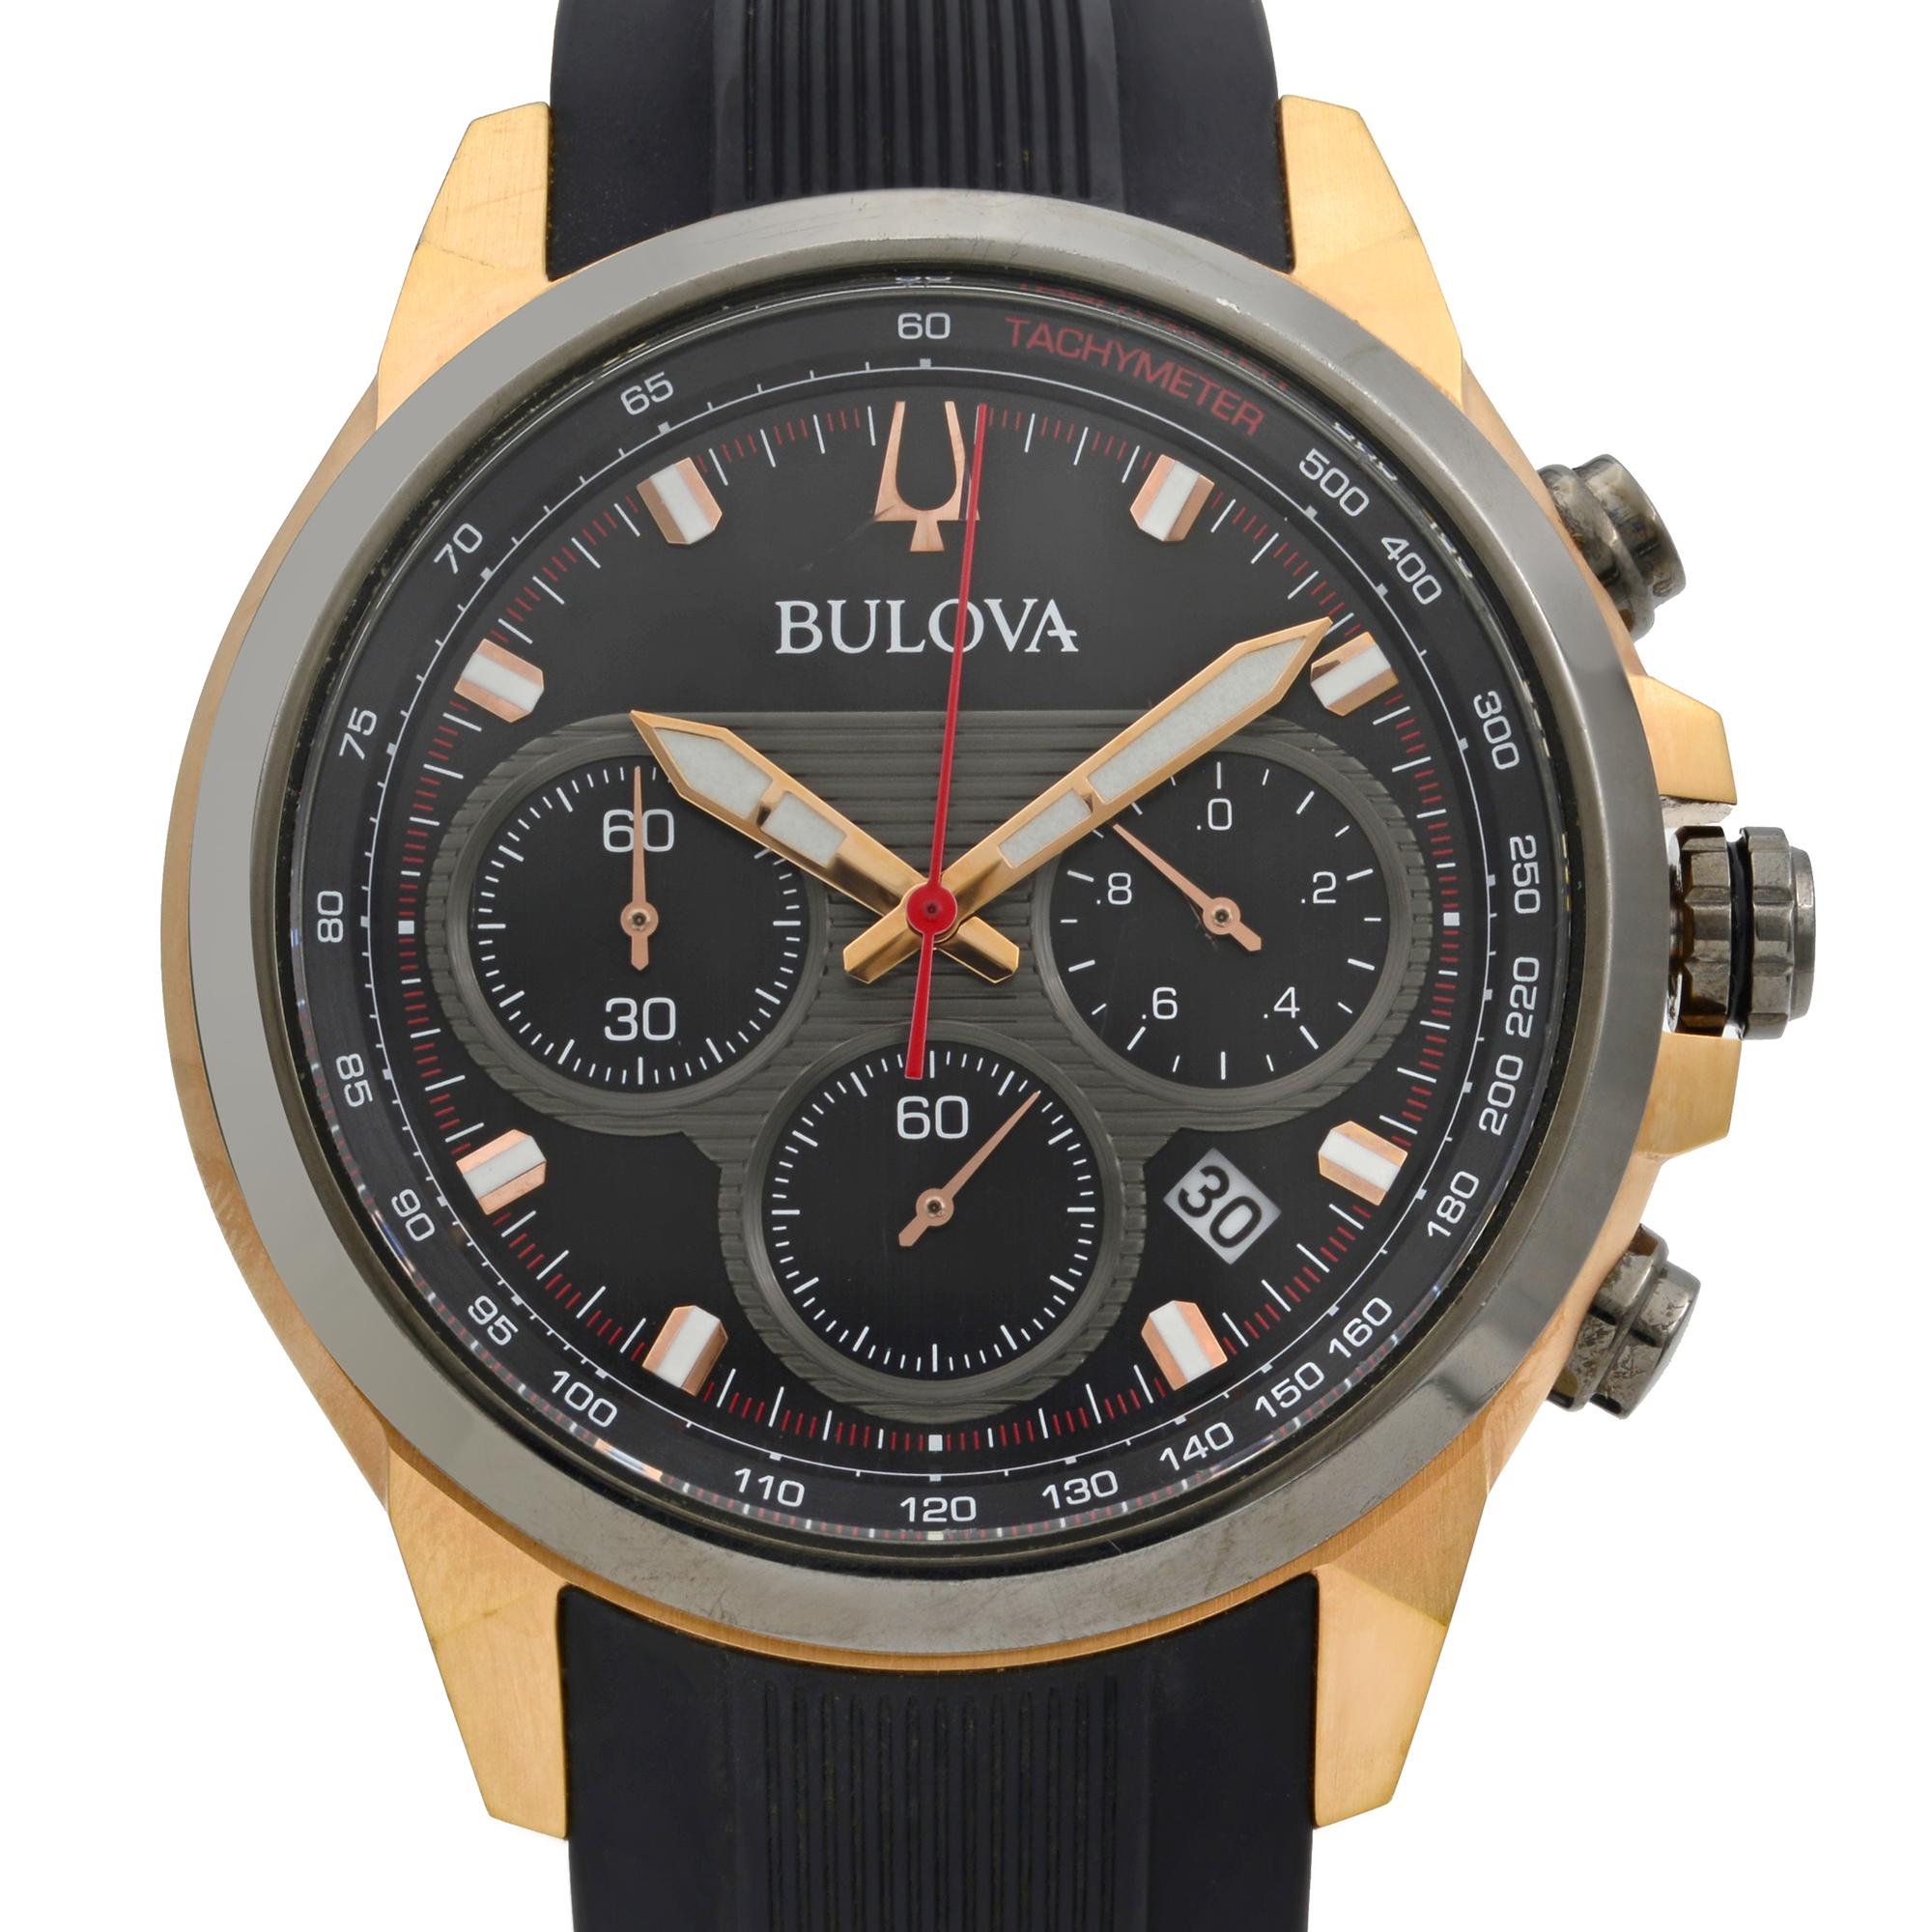 Case Shows Minor Wear Signs and Scratches. the bezel has minor dings on the edges. Original Box and Papers are Included. Covered by 1-year Chronostore Warranty. 
Brand Bulova
Color Black
Department Men
Model Number 98B311
Model Bulova
Style Casual,